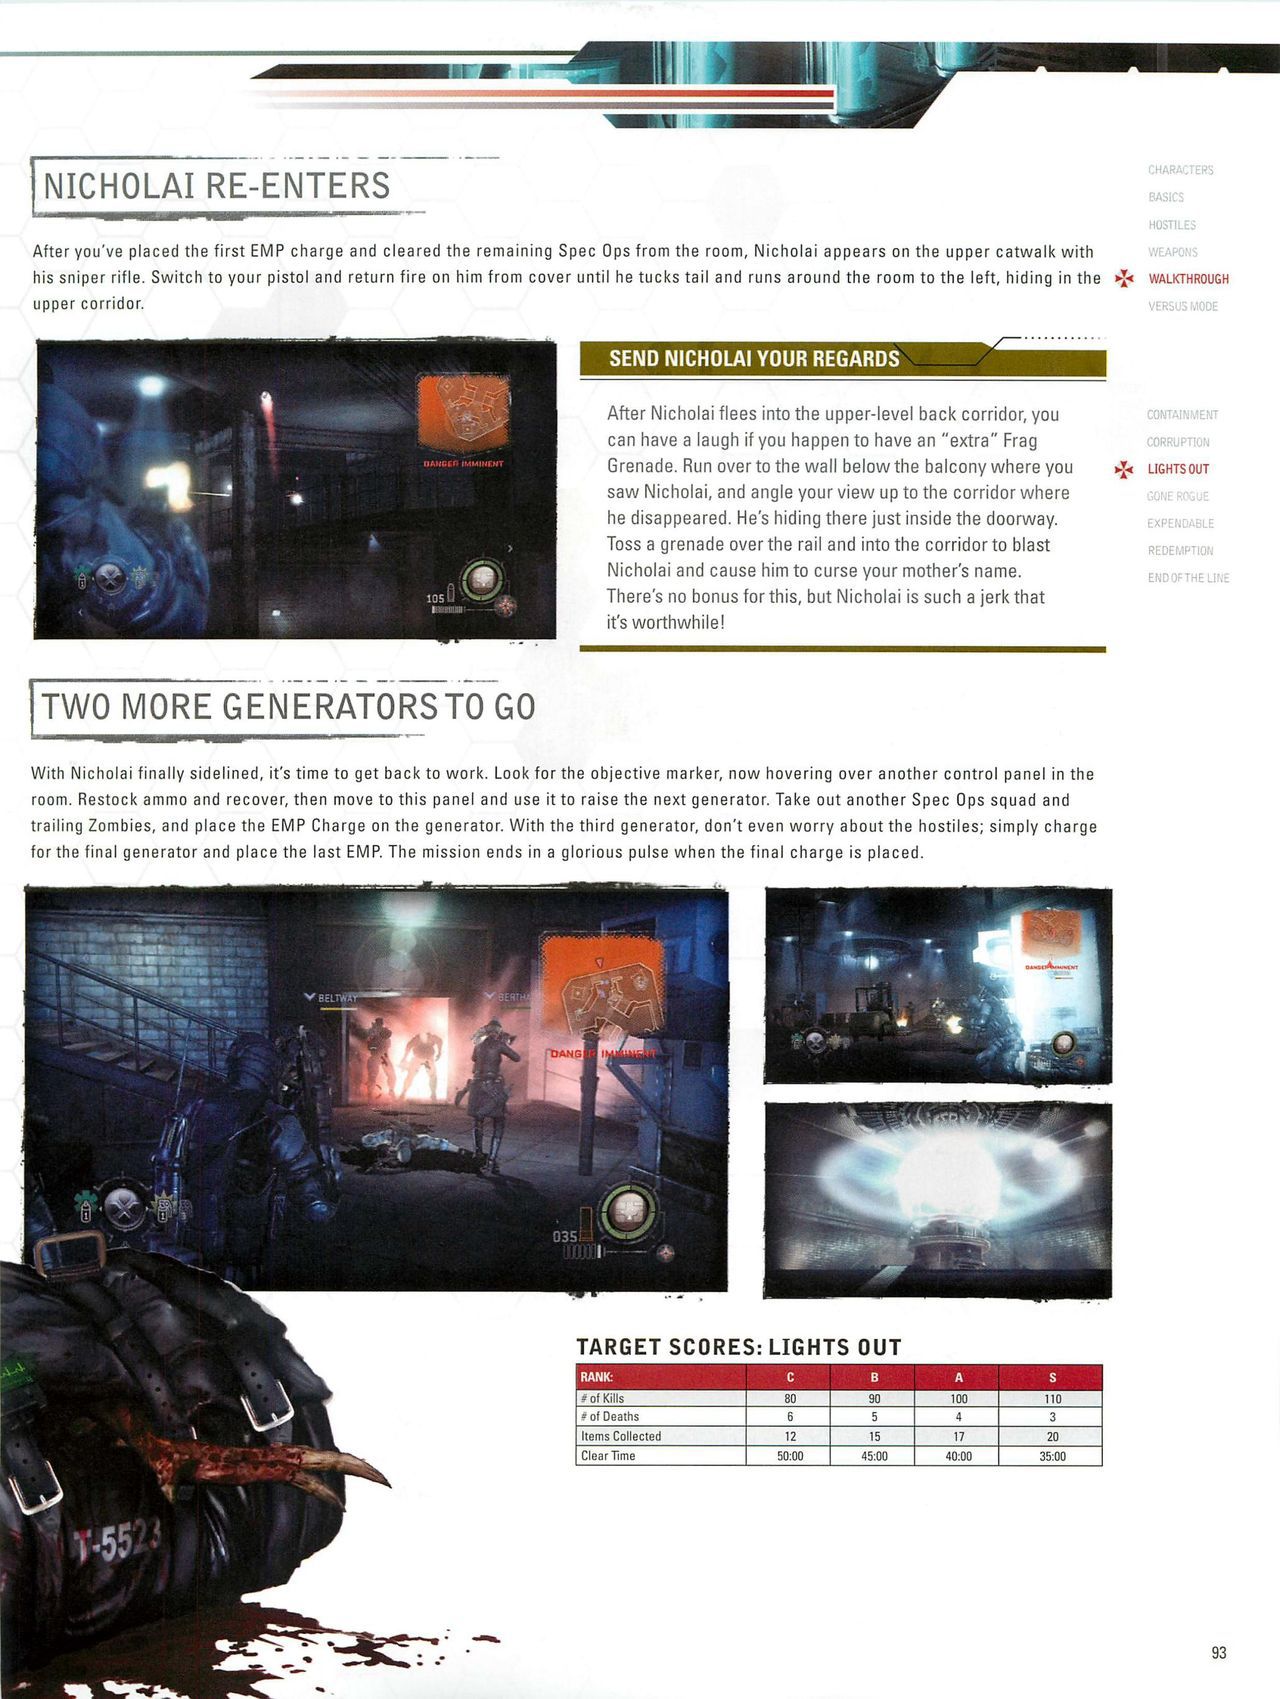 Resident Evil: Operation Raccoon City Official Strategy Guide (watermarked) 95